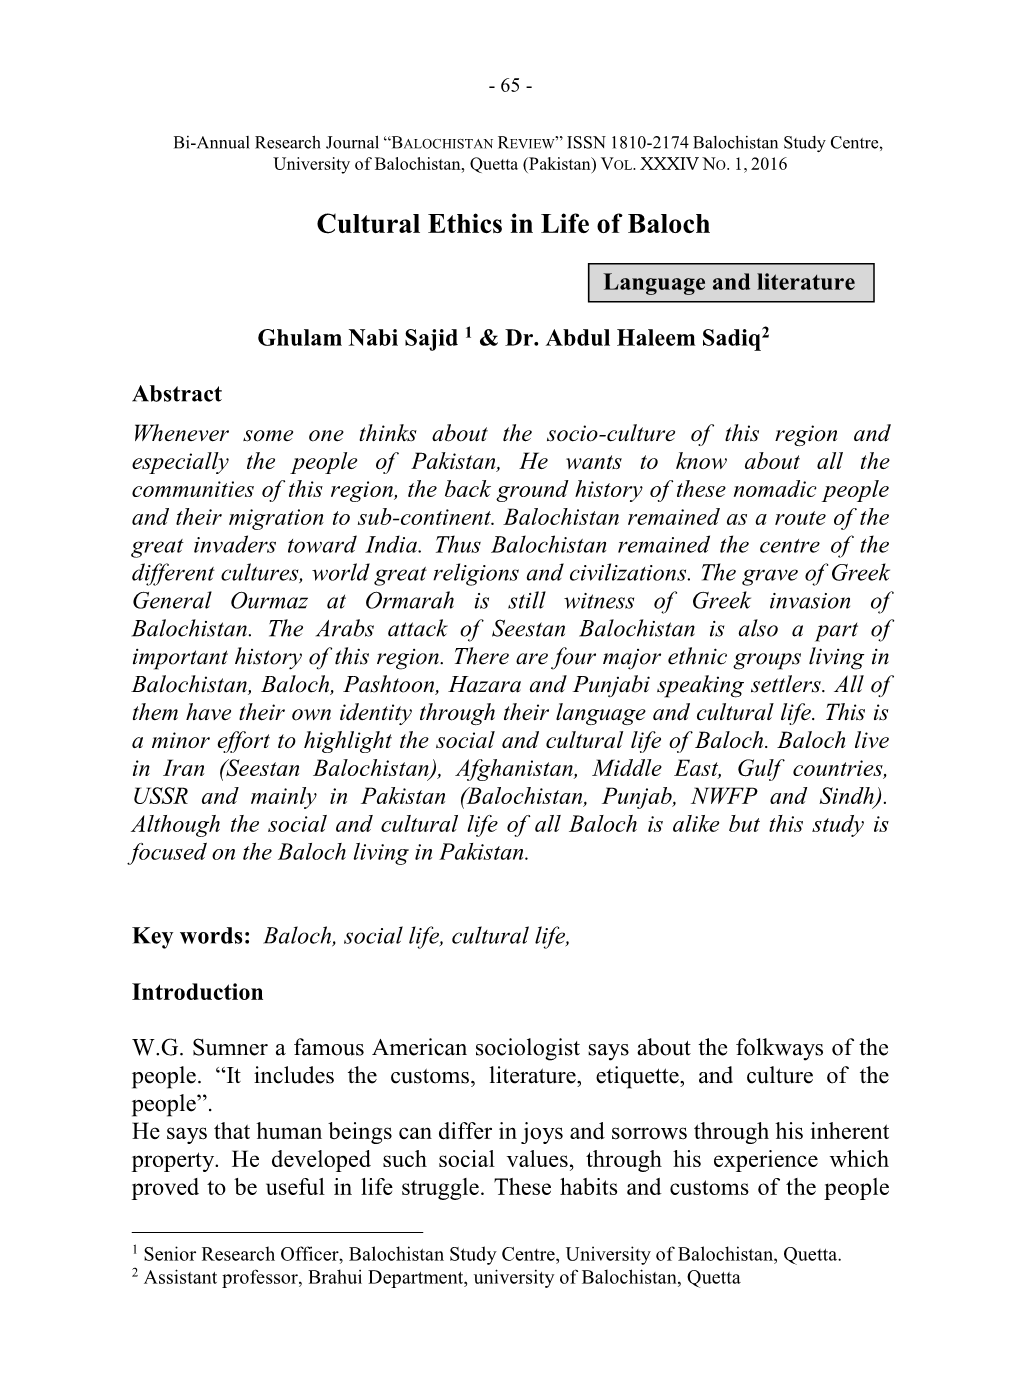 Cultural Ethics in Life of Baloch